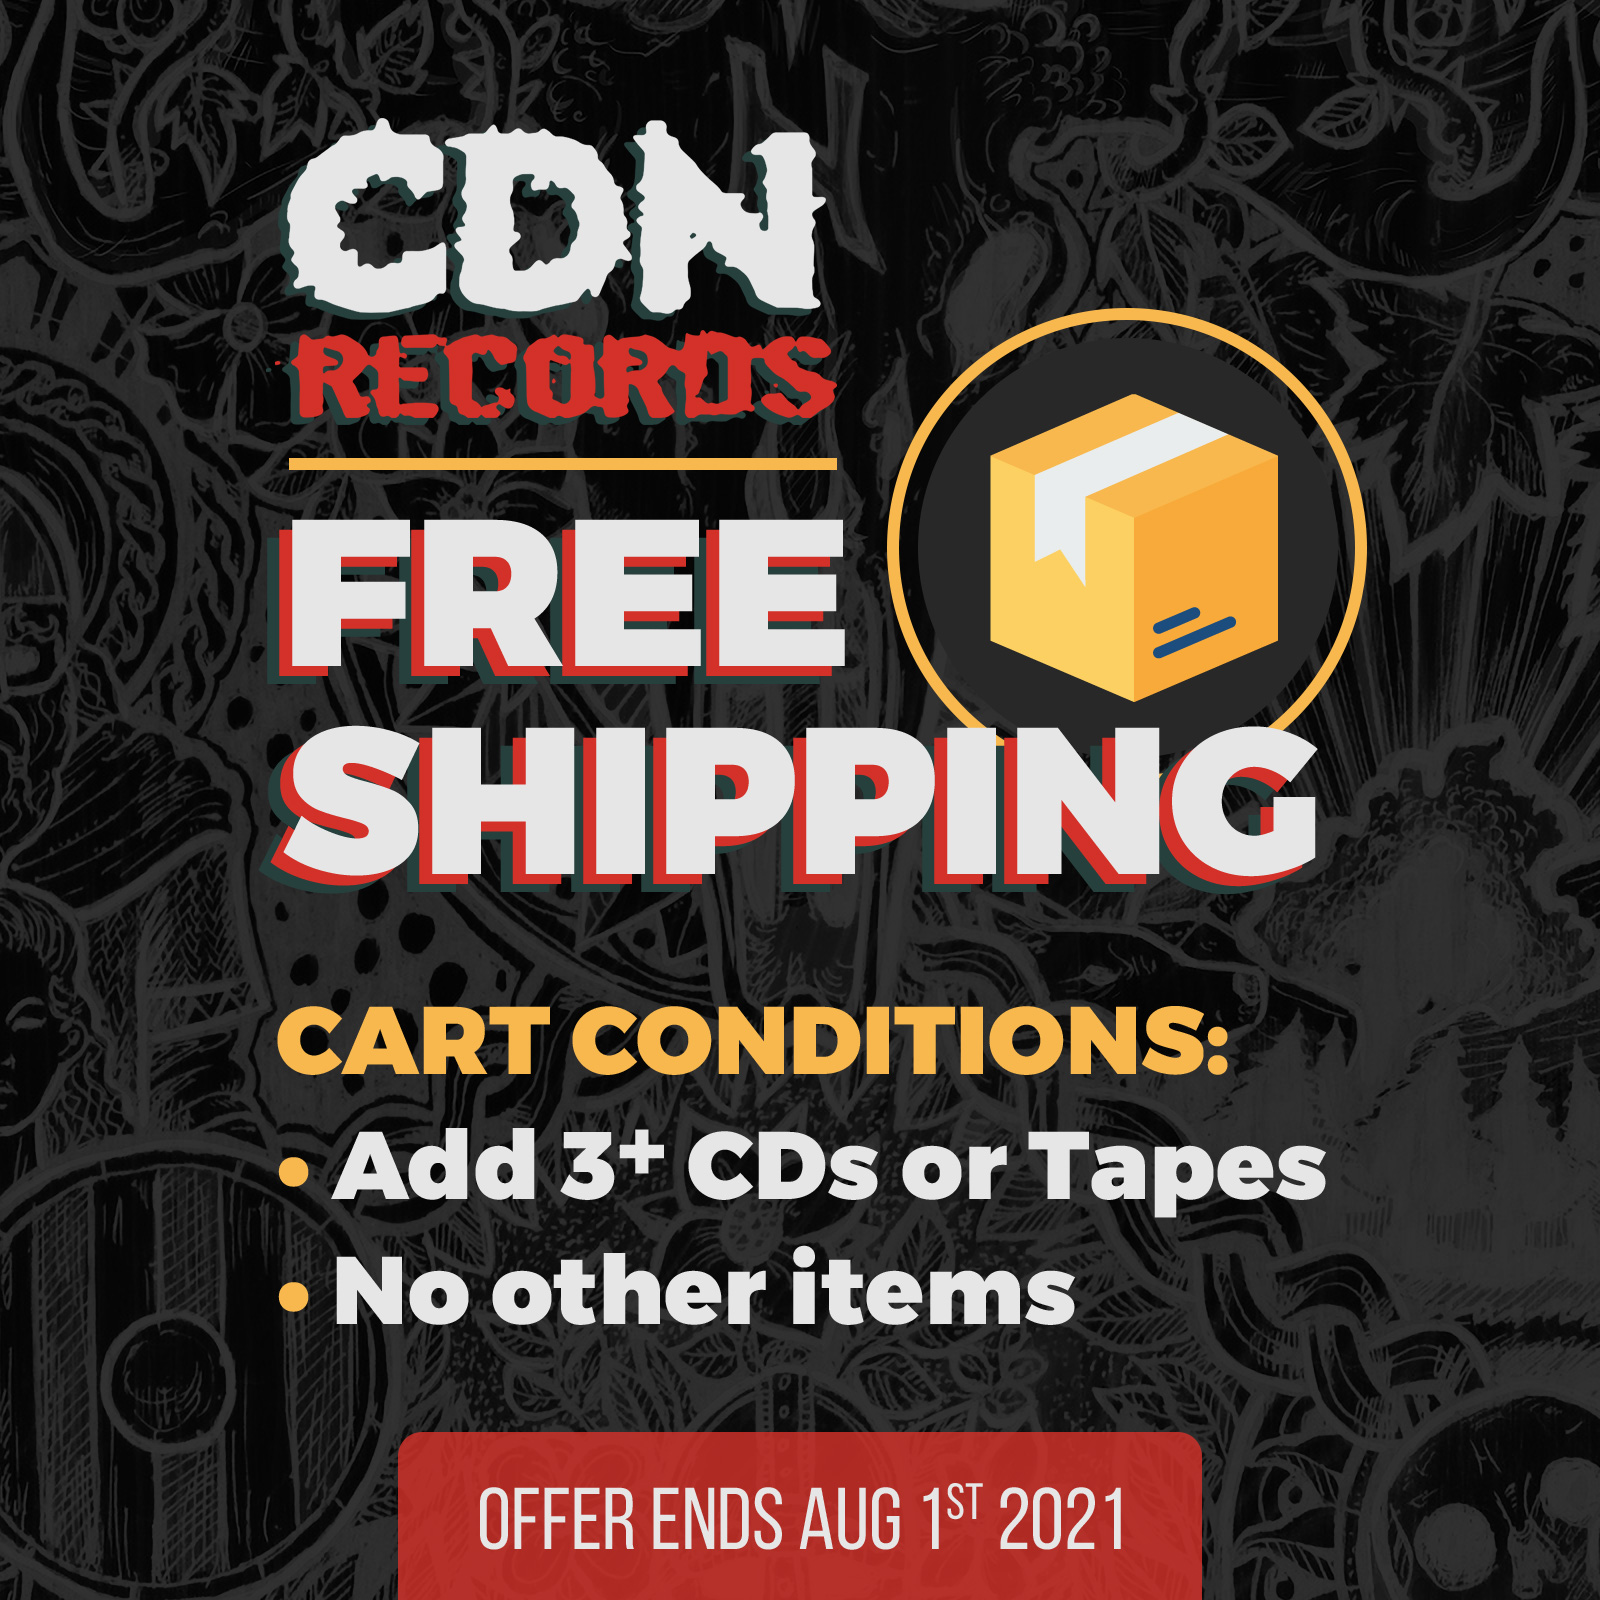 Promo for free shipping